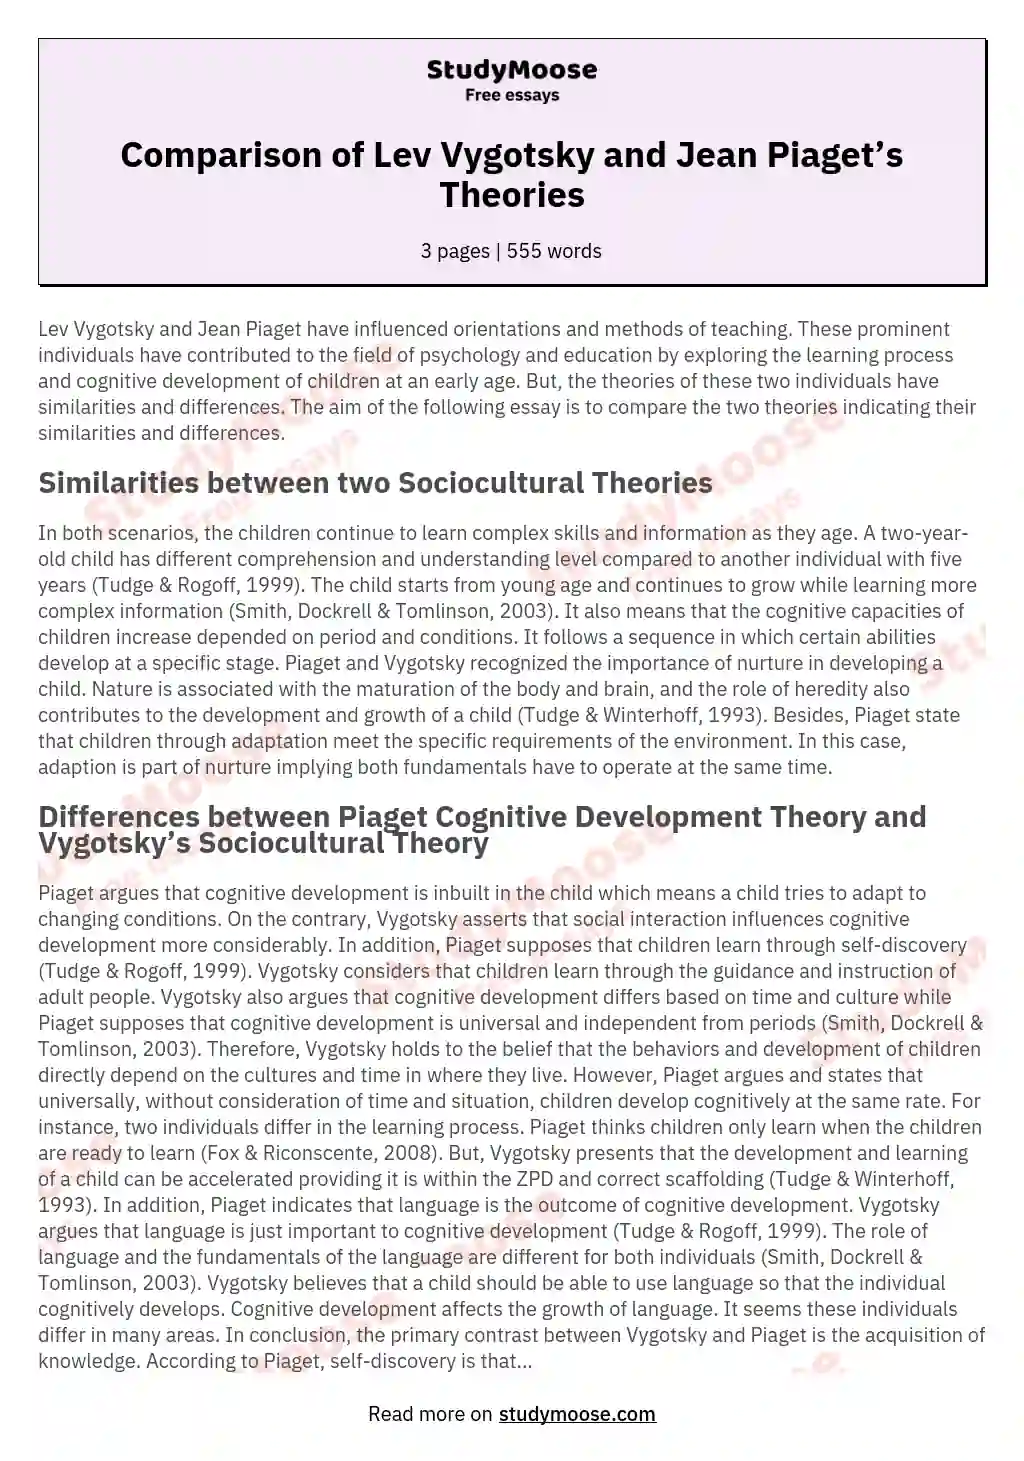 piaget and vygotsky theories of cognitive development